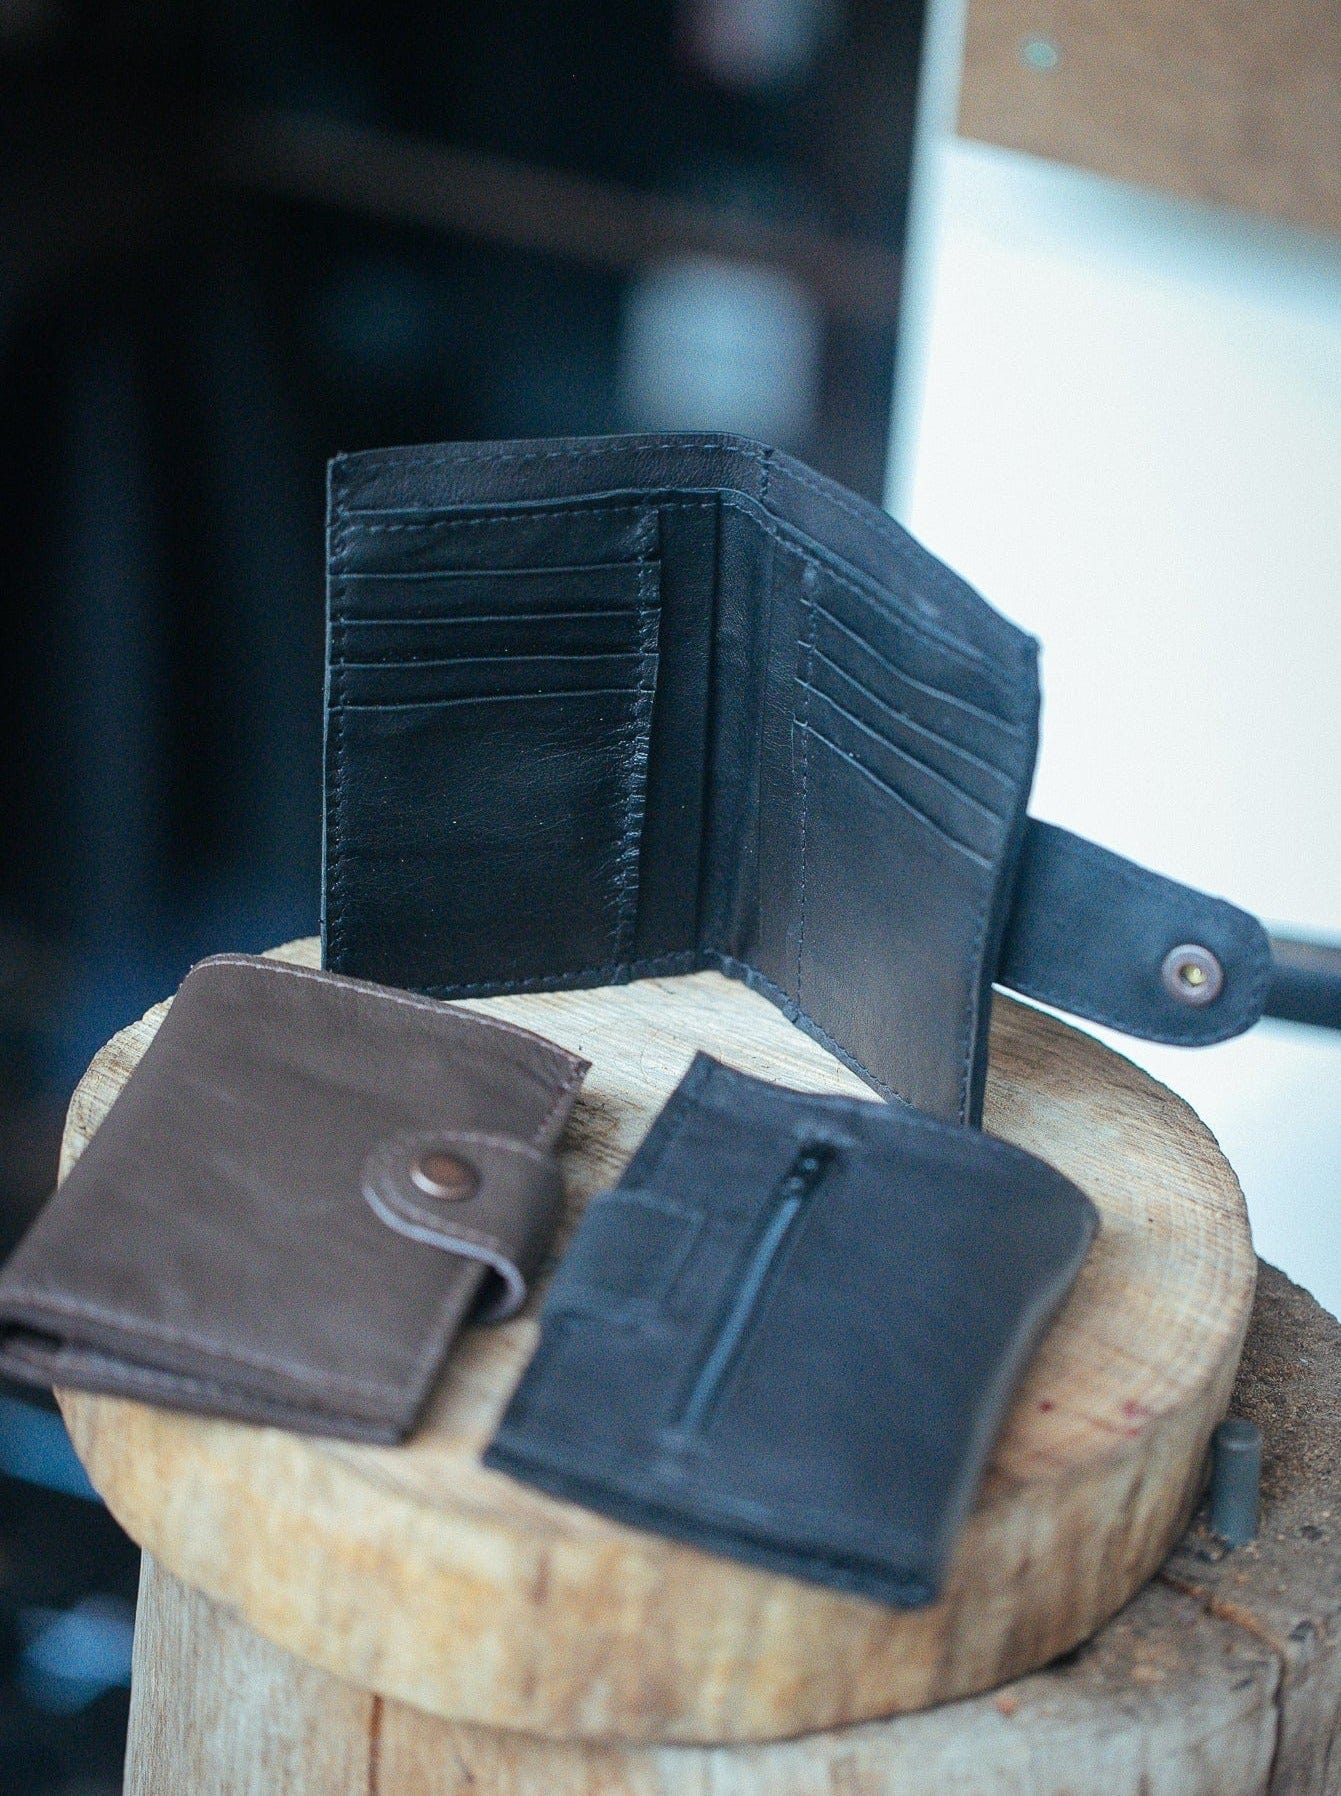 The Real McCaul Wallets The Andri Wallet - Cowhide Australian Made Australian Owned Genuine Leather Ladies Small Wallet- Made In Australia with Kangaroo and Cowhide